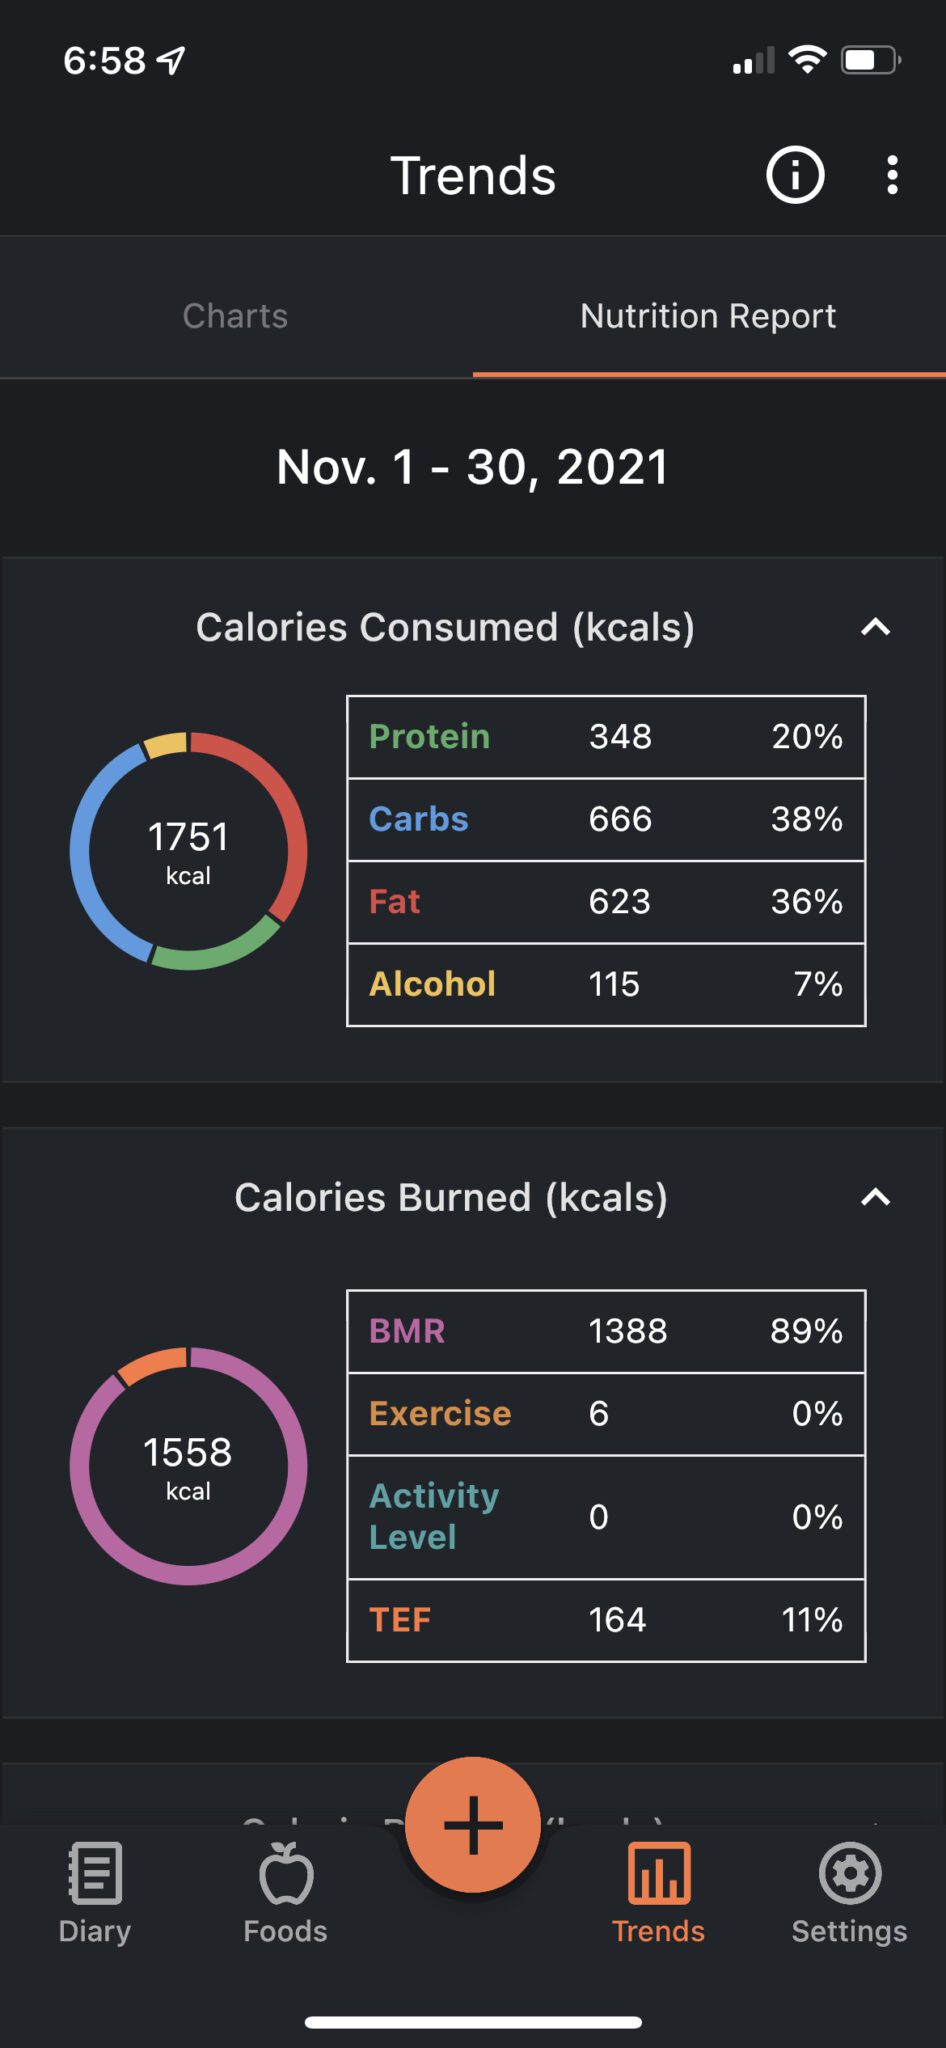 The nutrition report on the trends page gives you an overview of the week's intake.